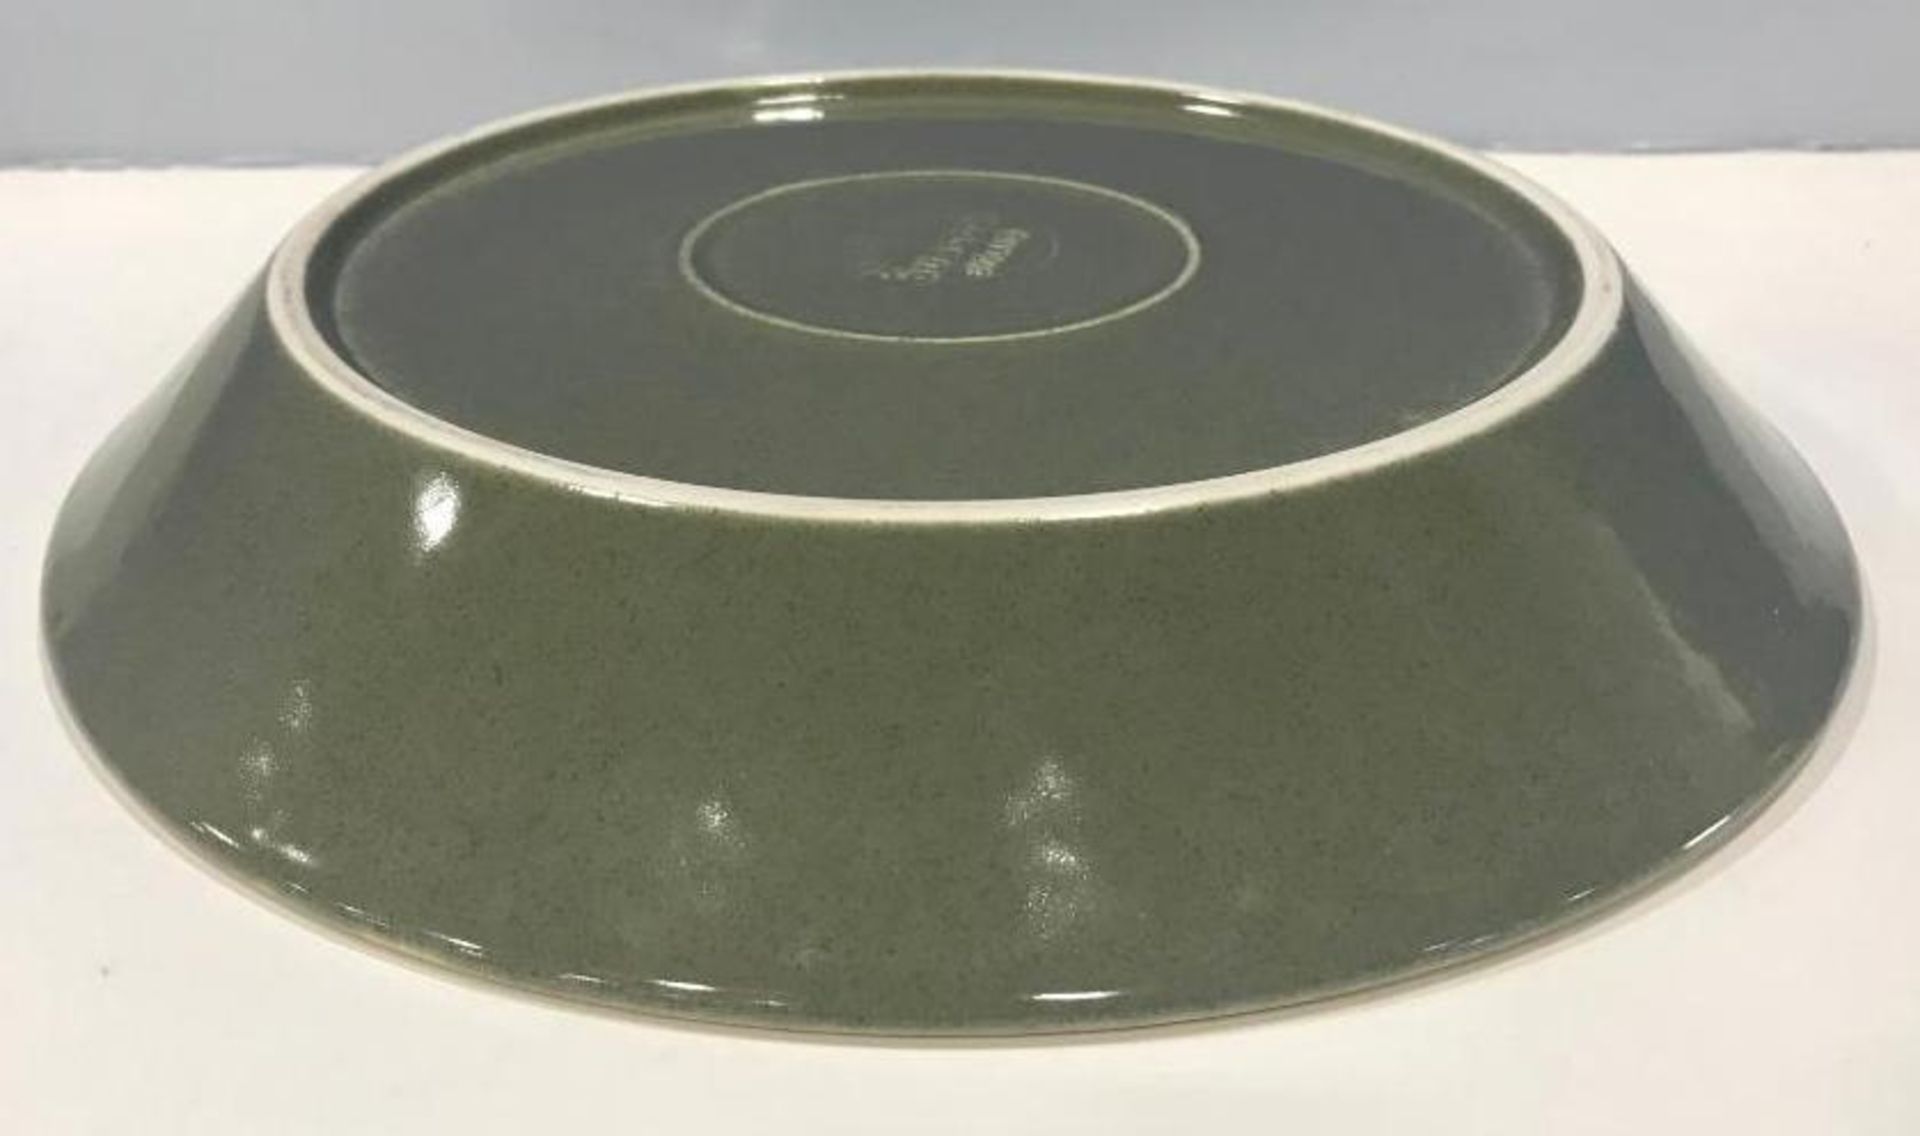 DUDSON GREEN & SAND SALAD BOWL 9.5" - 18/CASE, MADE IN ENGLAND - Image 4 of 6